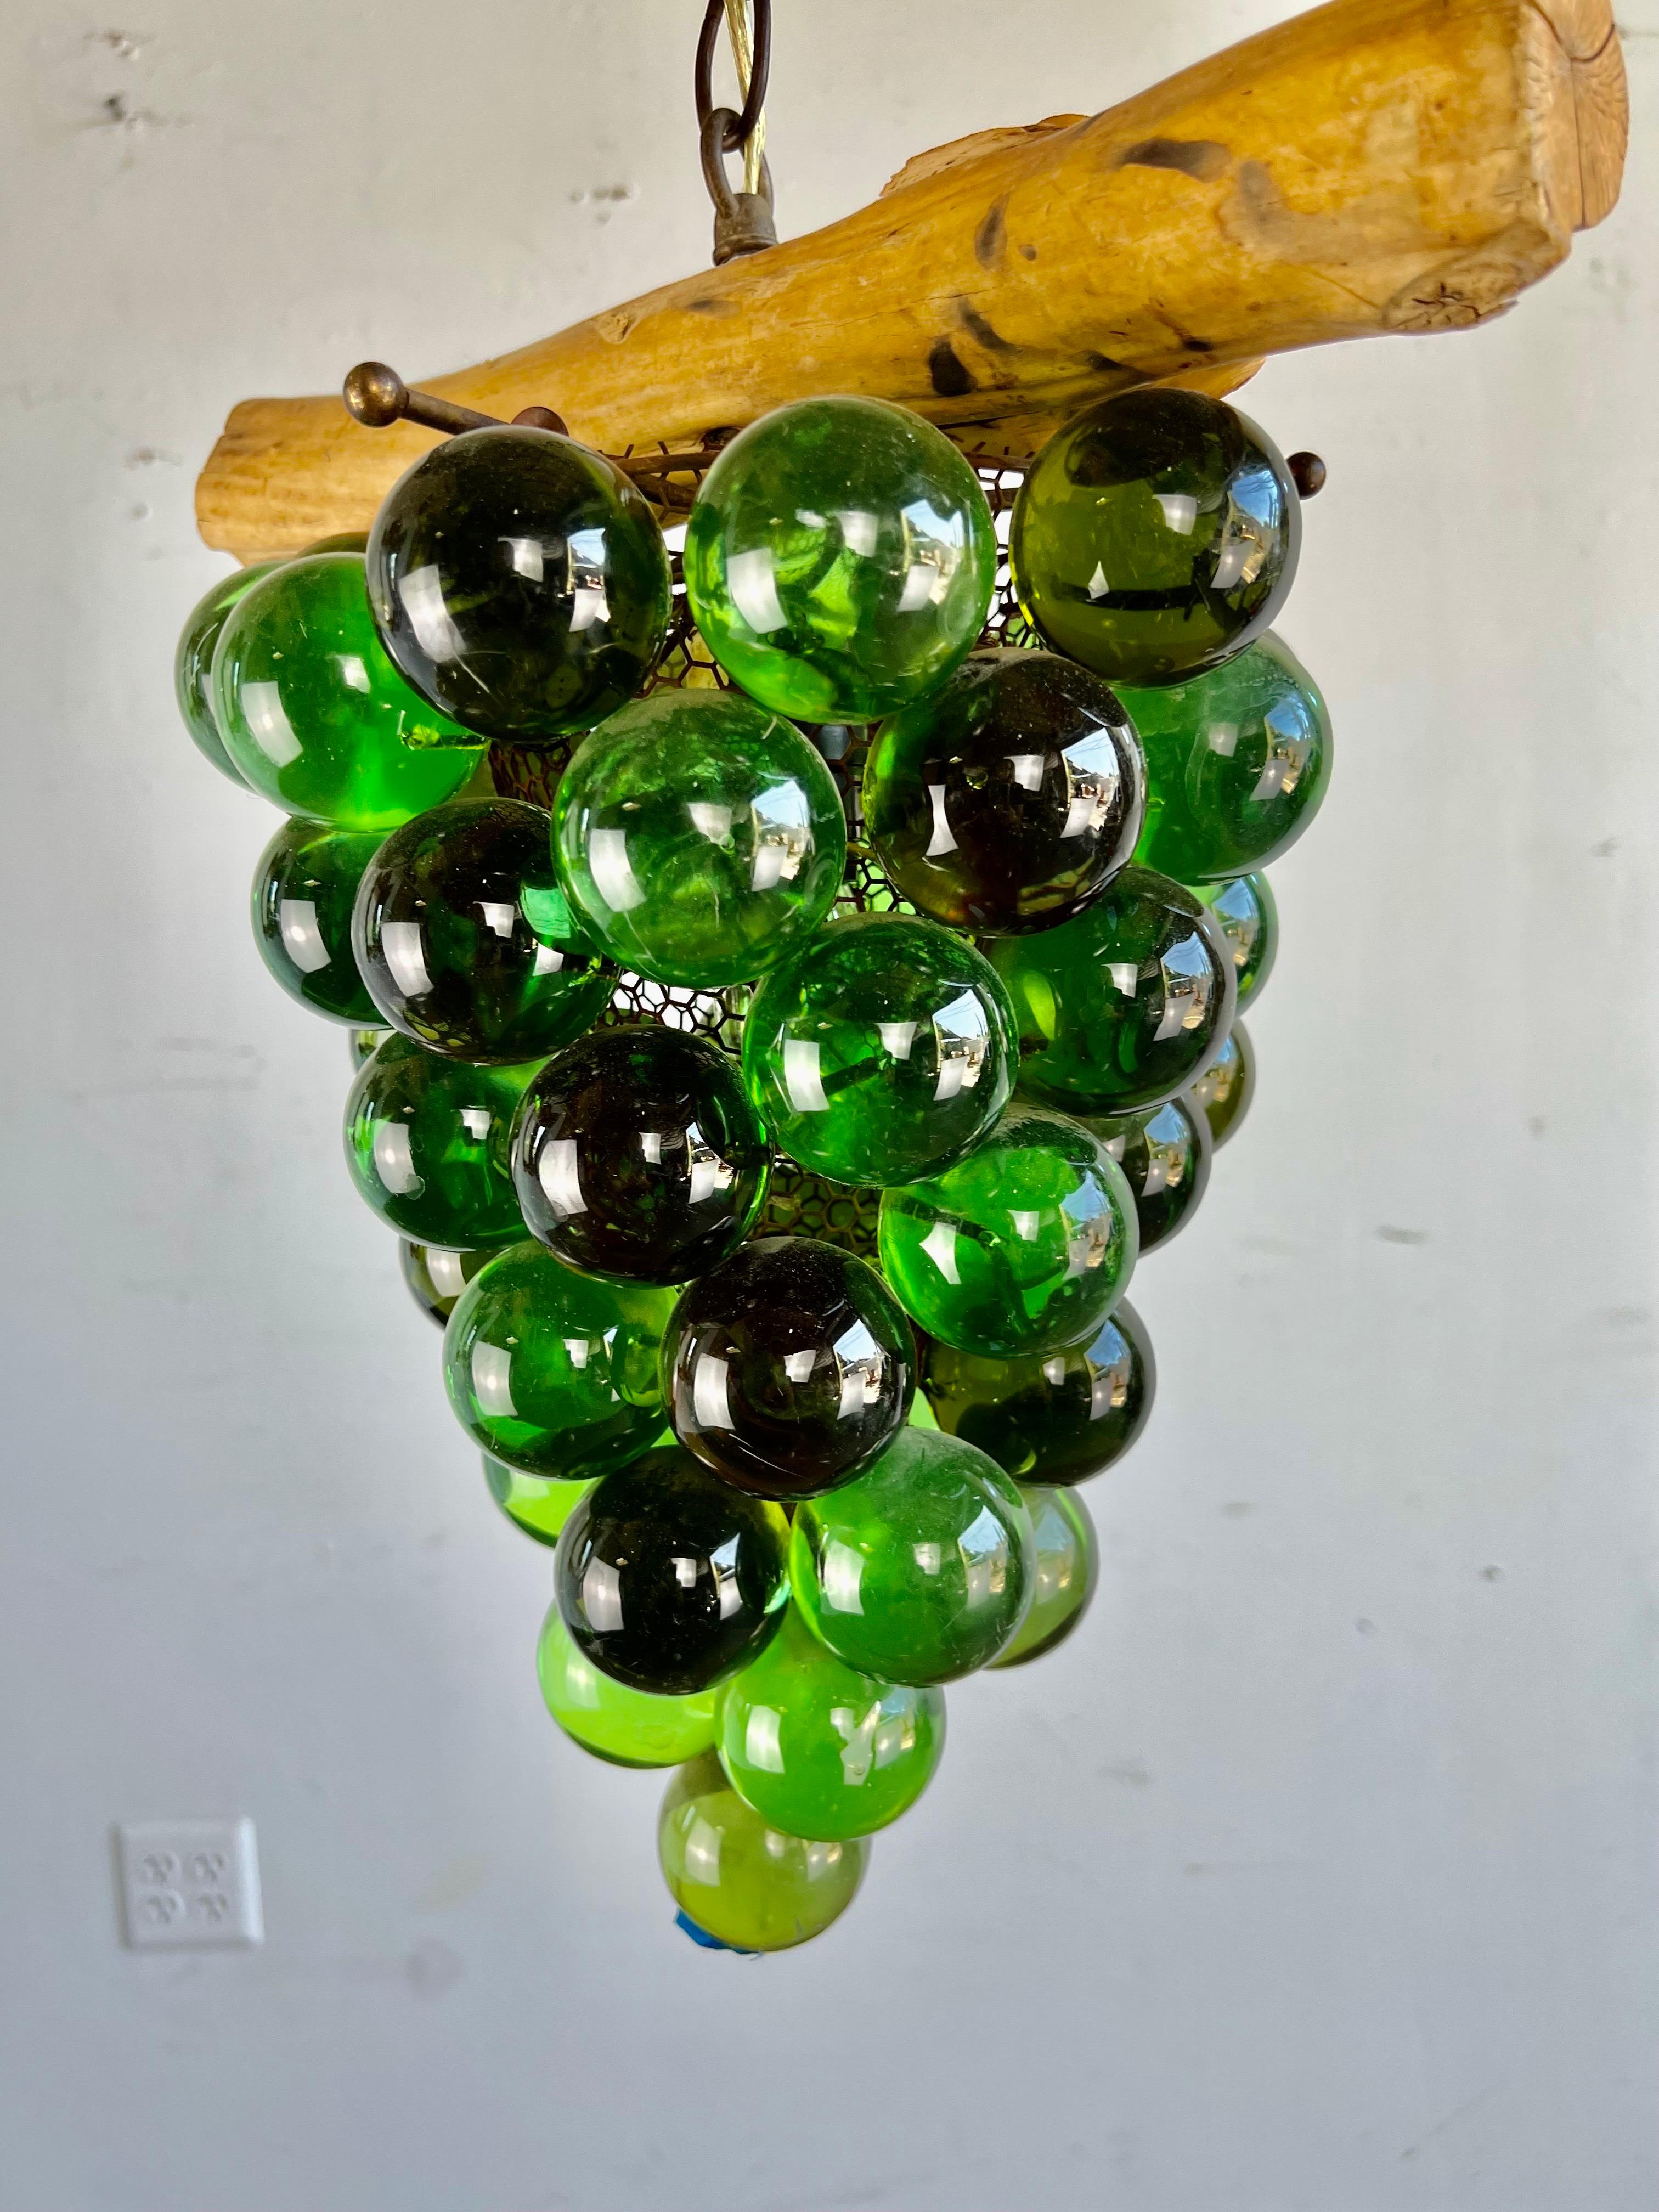 A light fixture made from a bunch of green acrylic grapes hanging from a piece of wood. The fixture is in newly wired and in working condition.